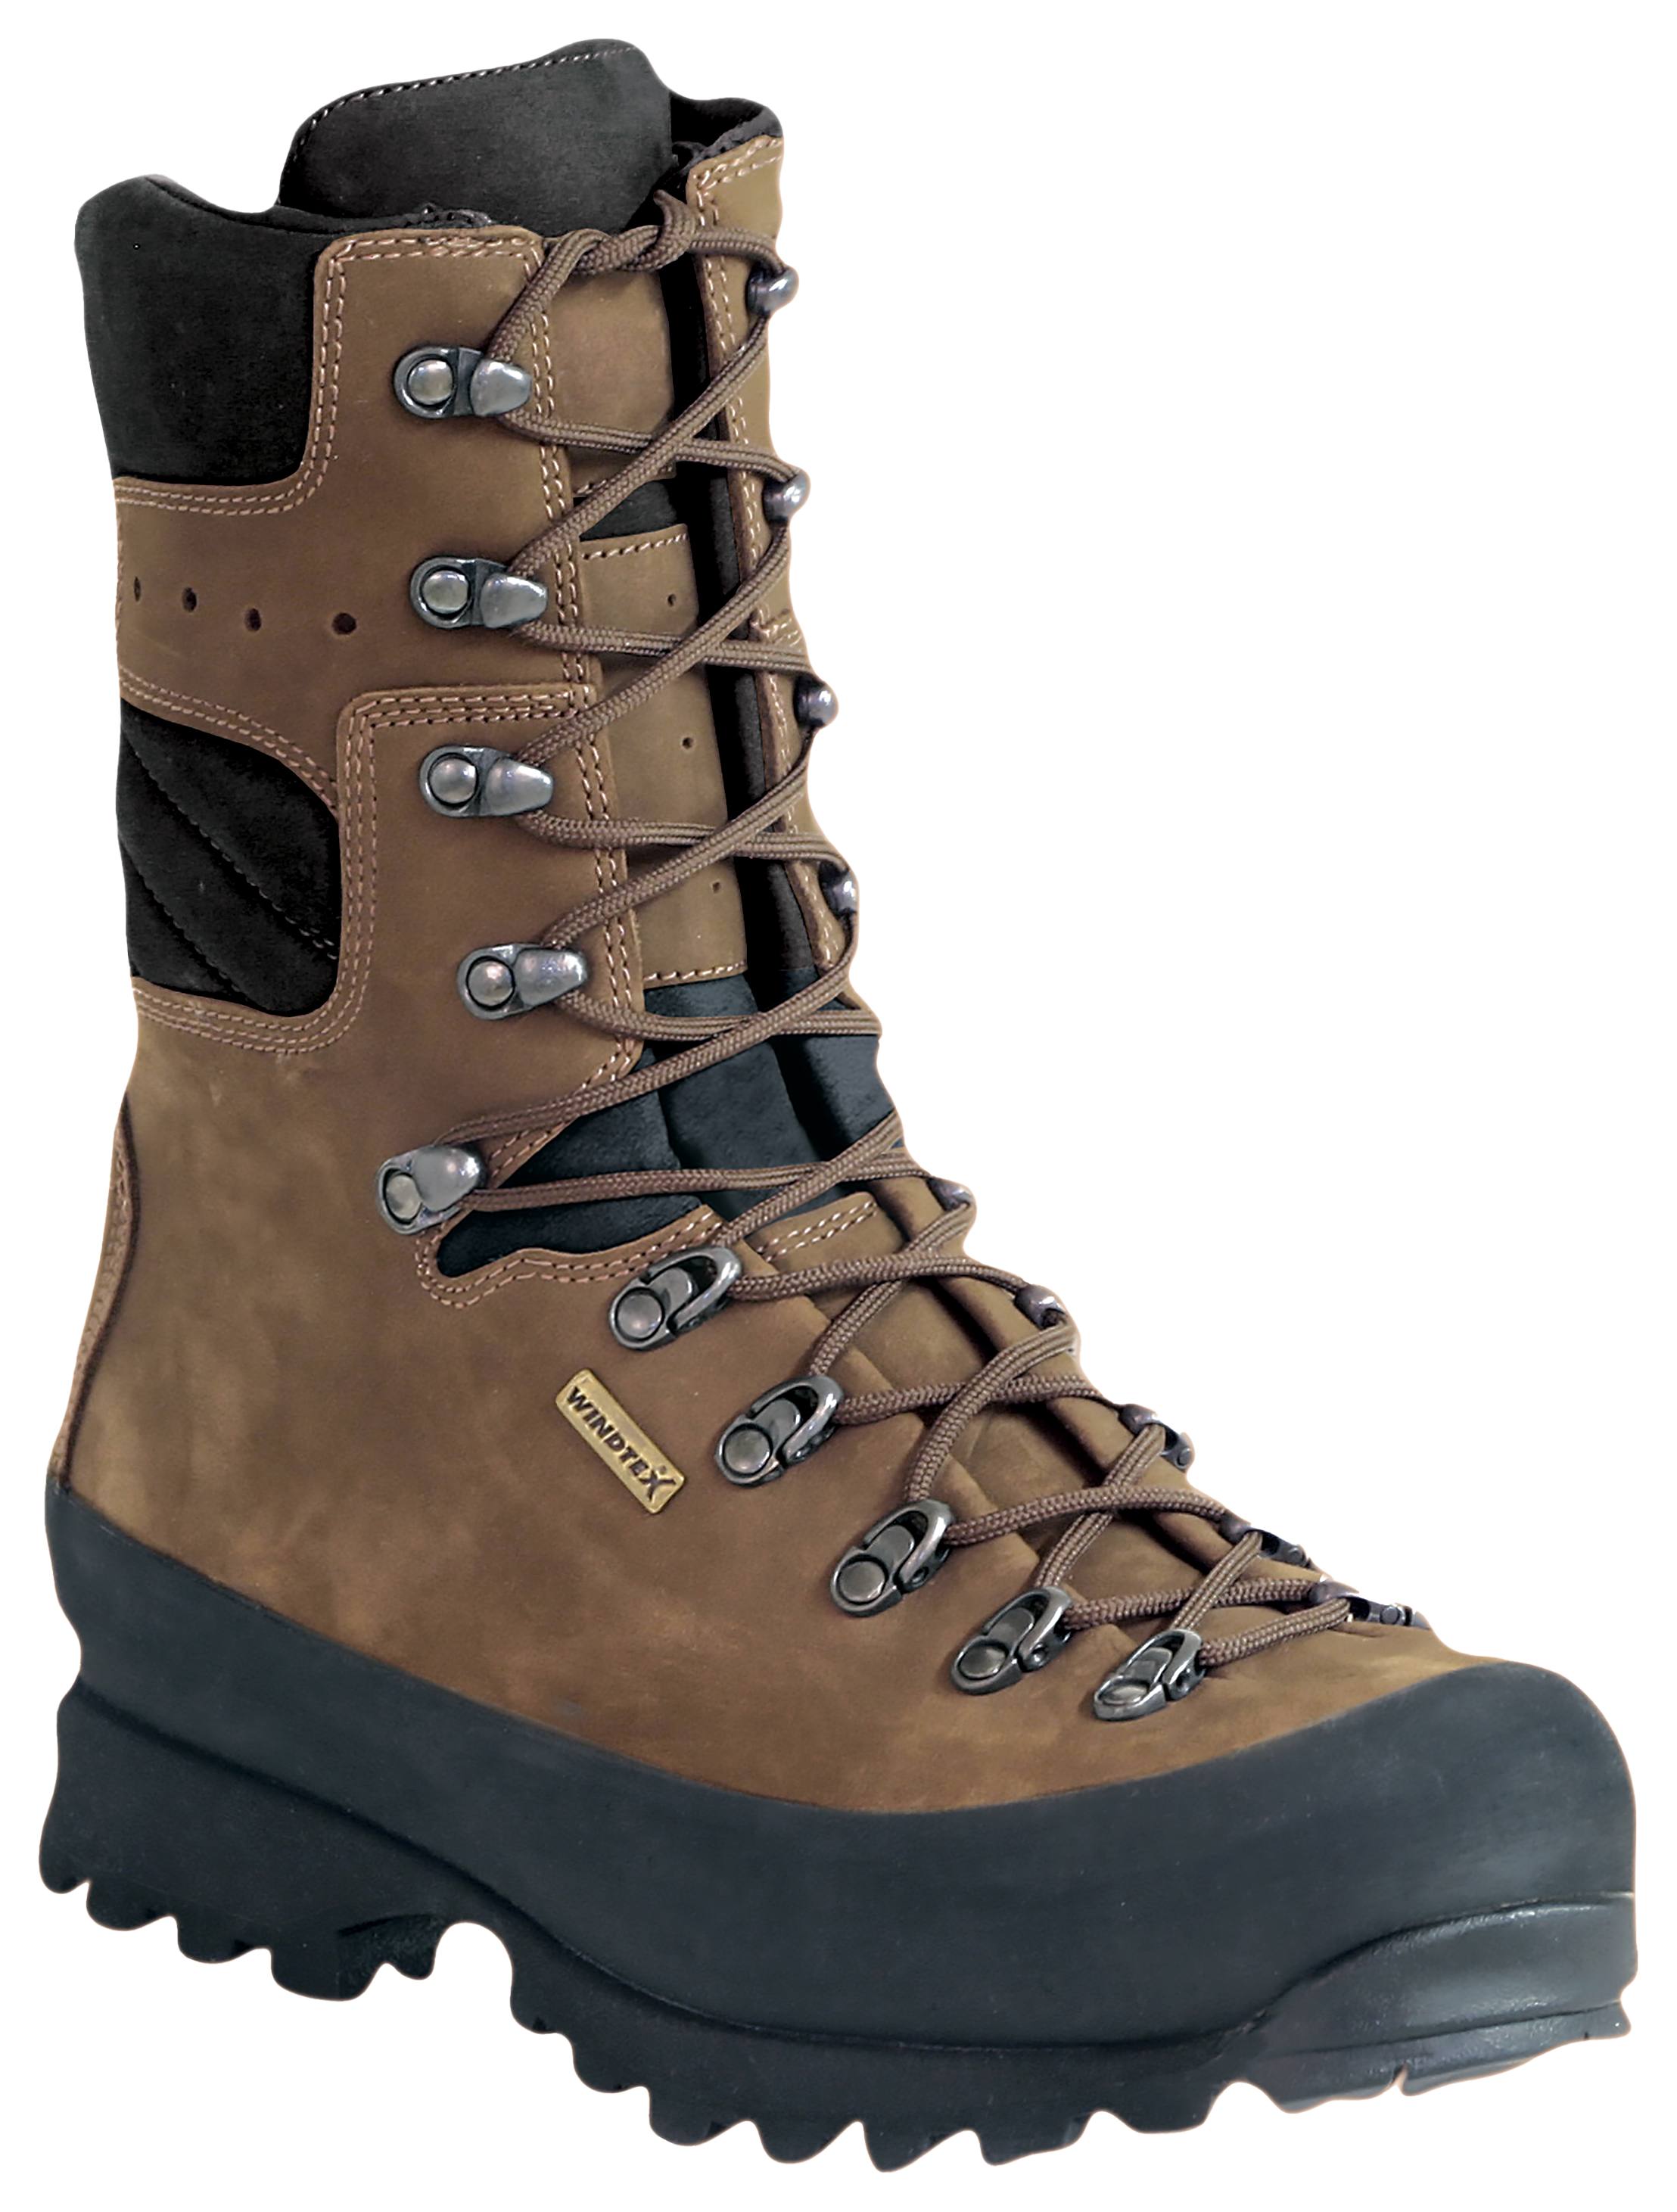 Kenetrek Mountain Extreme 1000 Insulated Waterproof Hunting Boots for Men - Brown - 12M